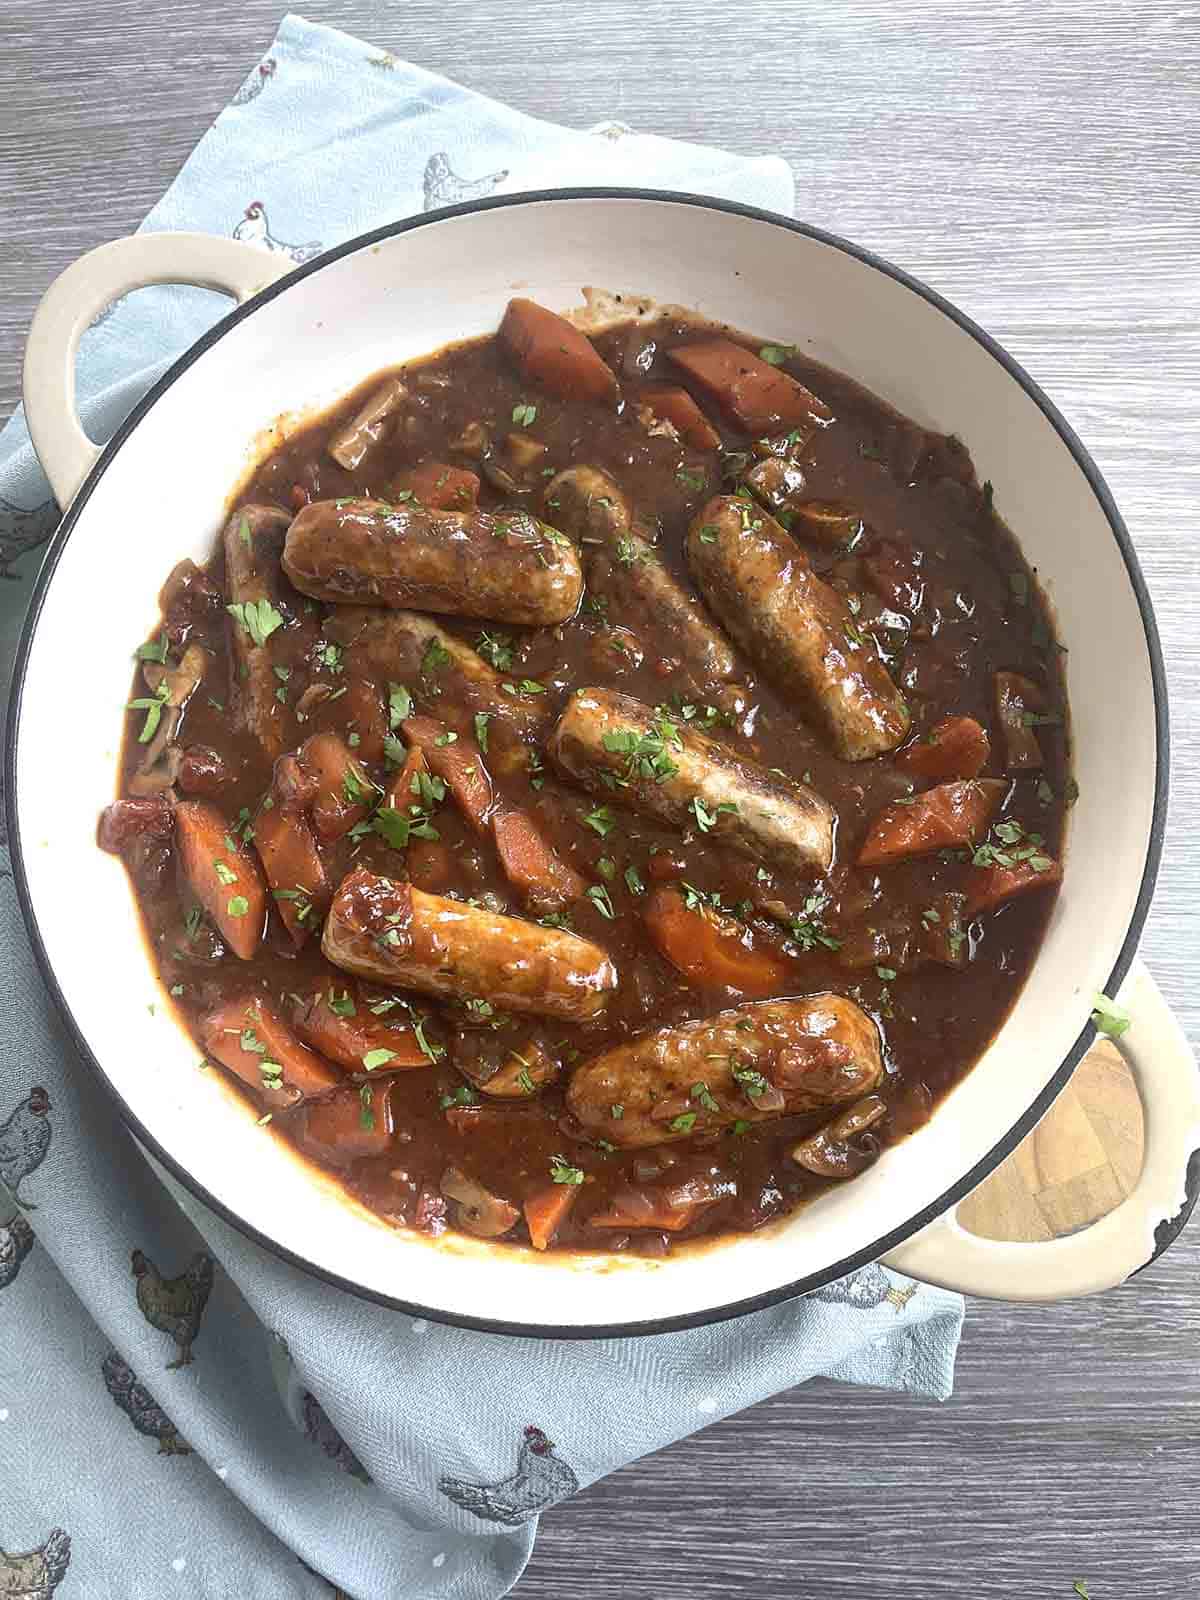 slow cooker sausage casserole in a serving dish.